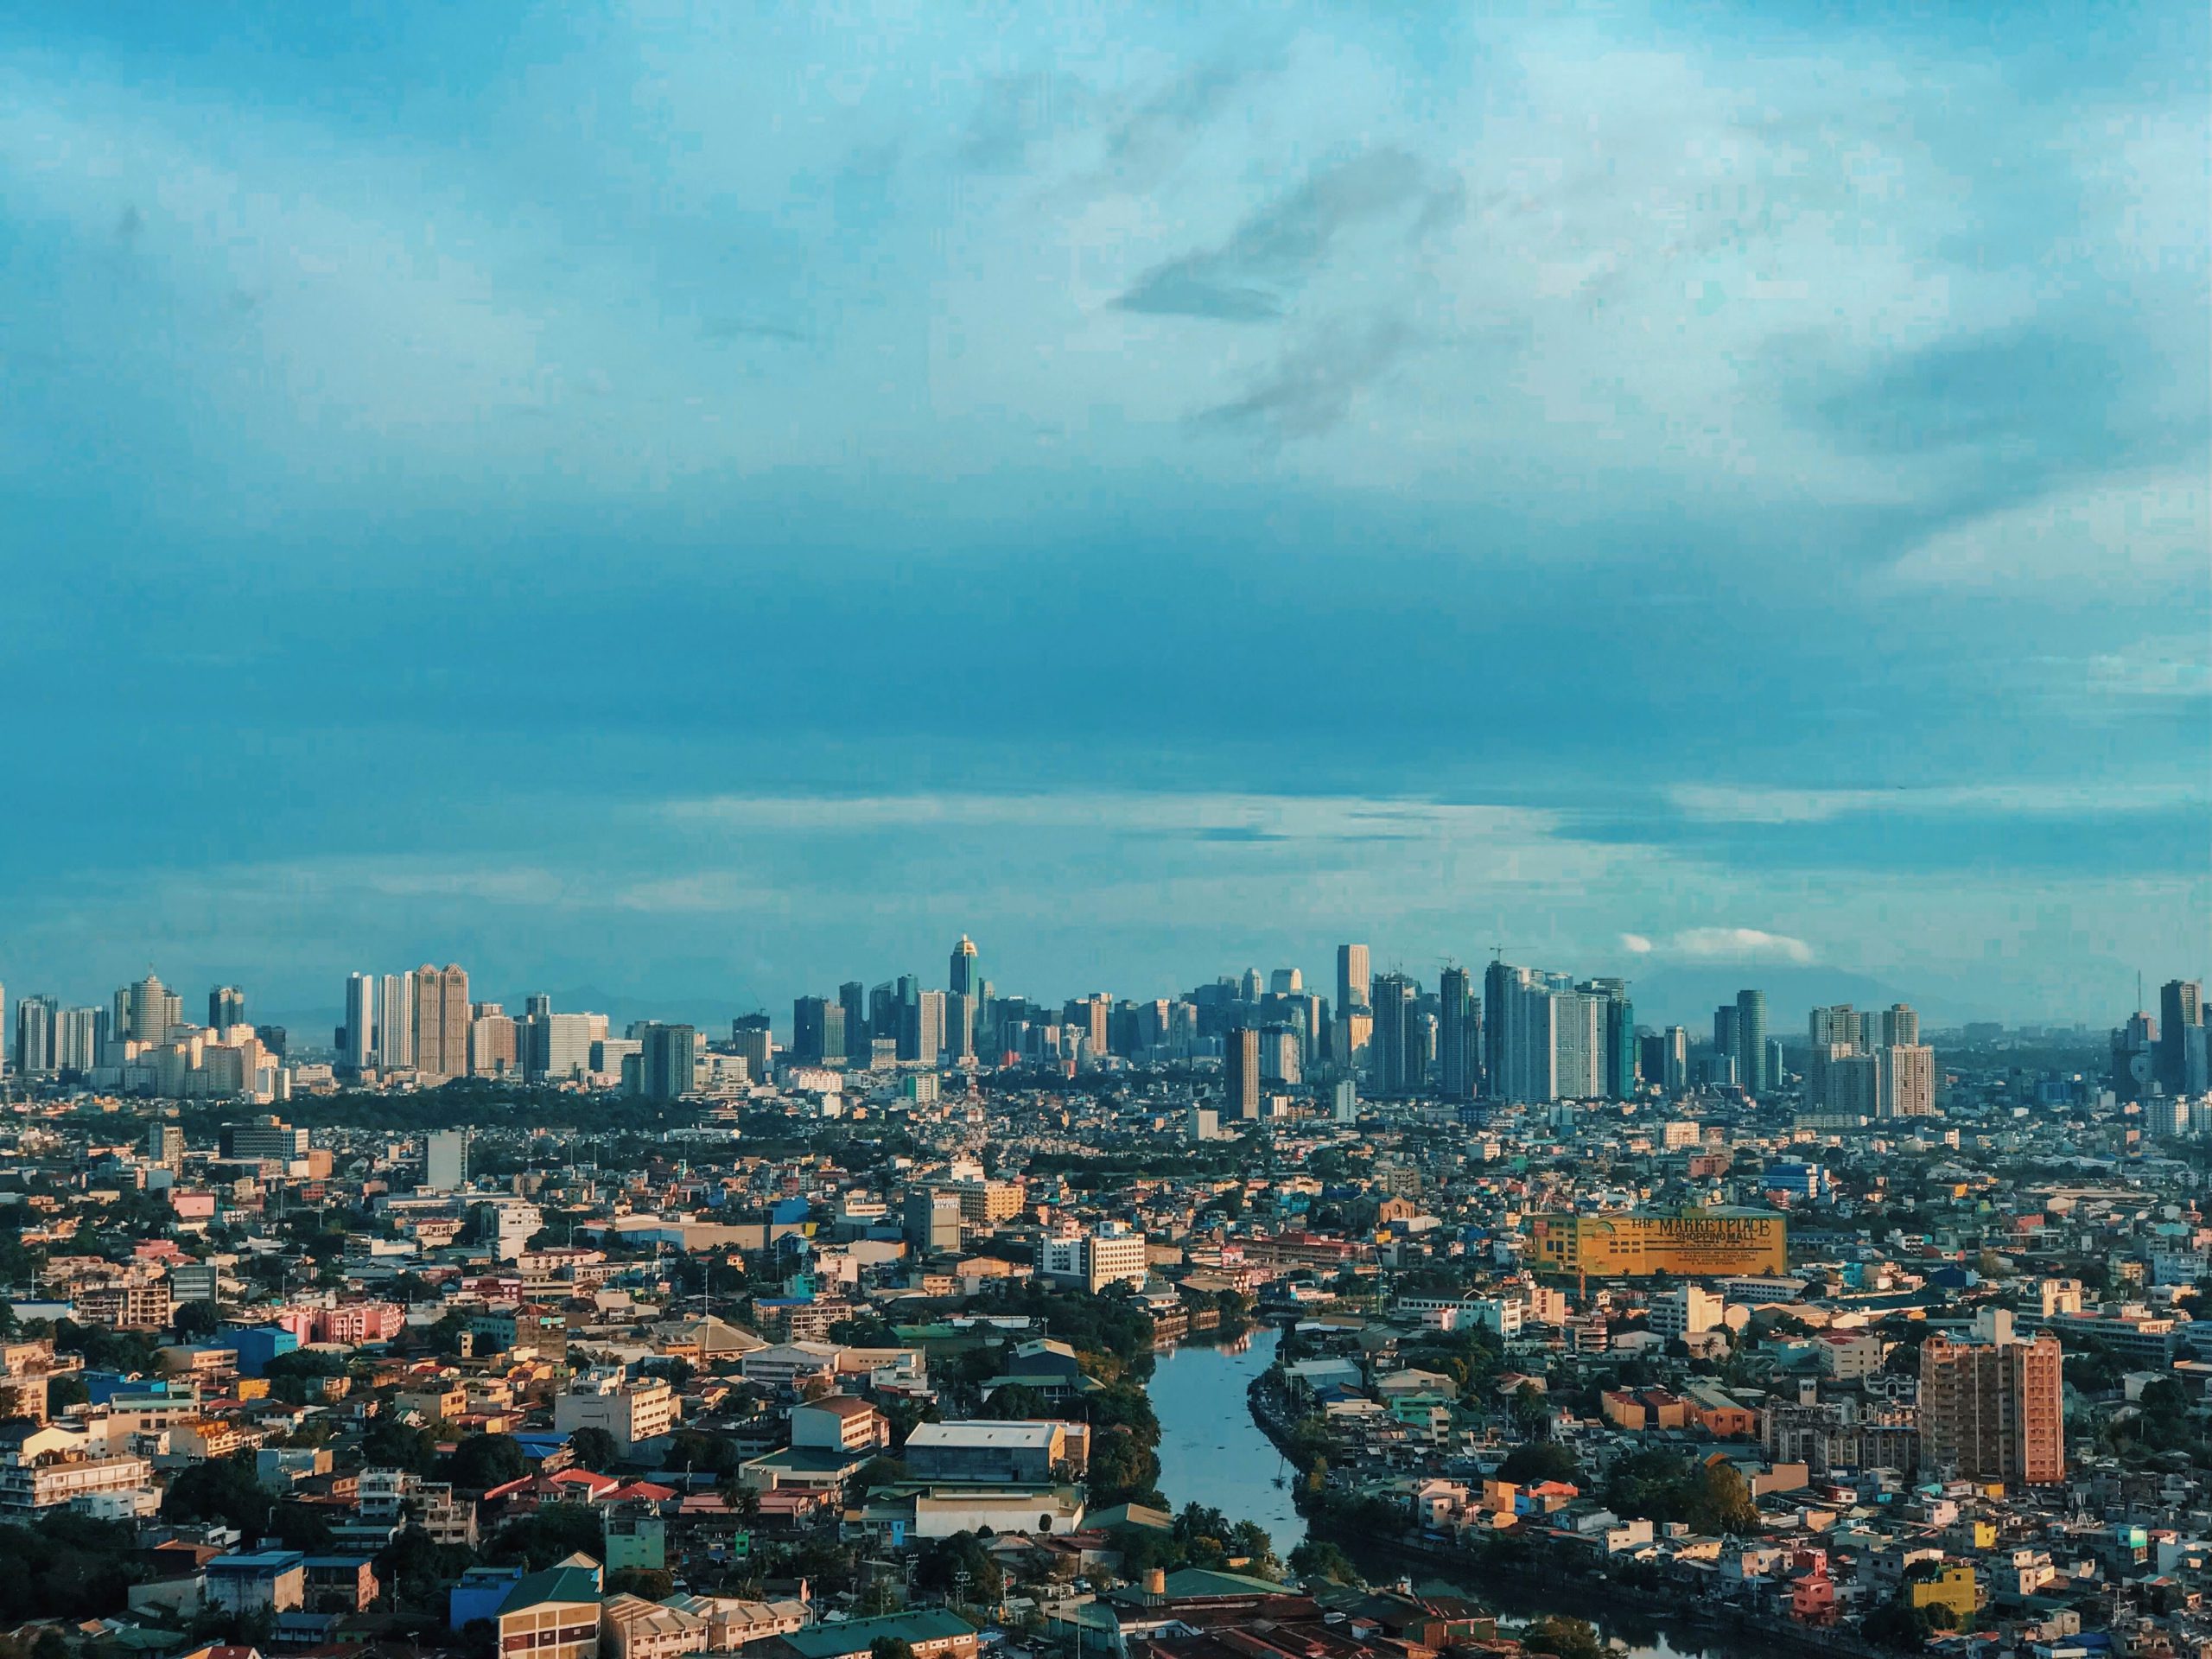 Four takeaways on the burgeoning startup ecosystem in the Philippines by Foxmont Capital Partners’ Franco Varona